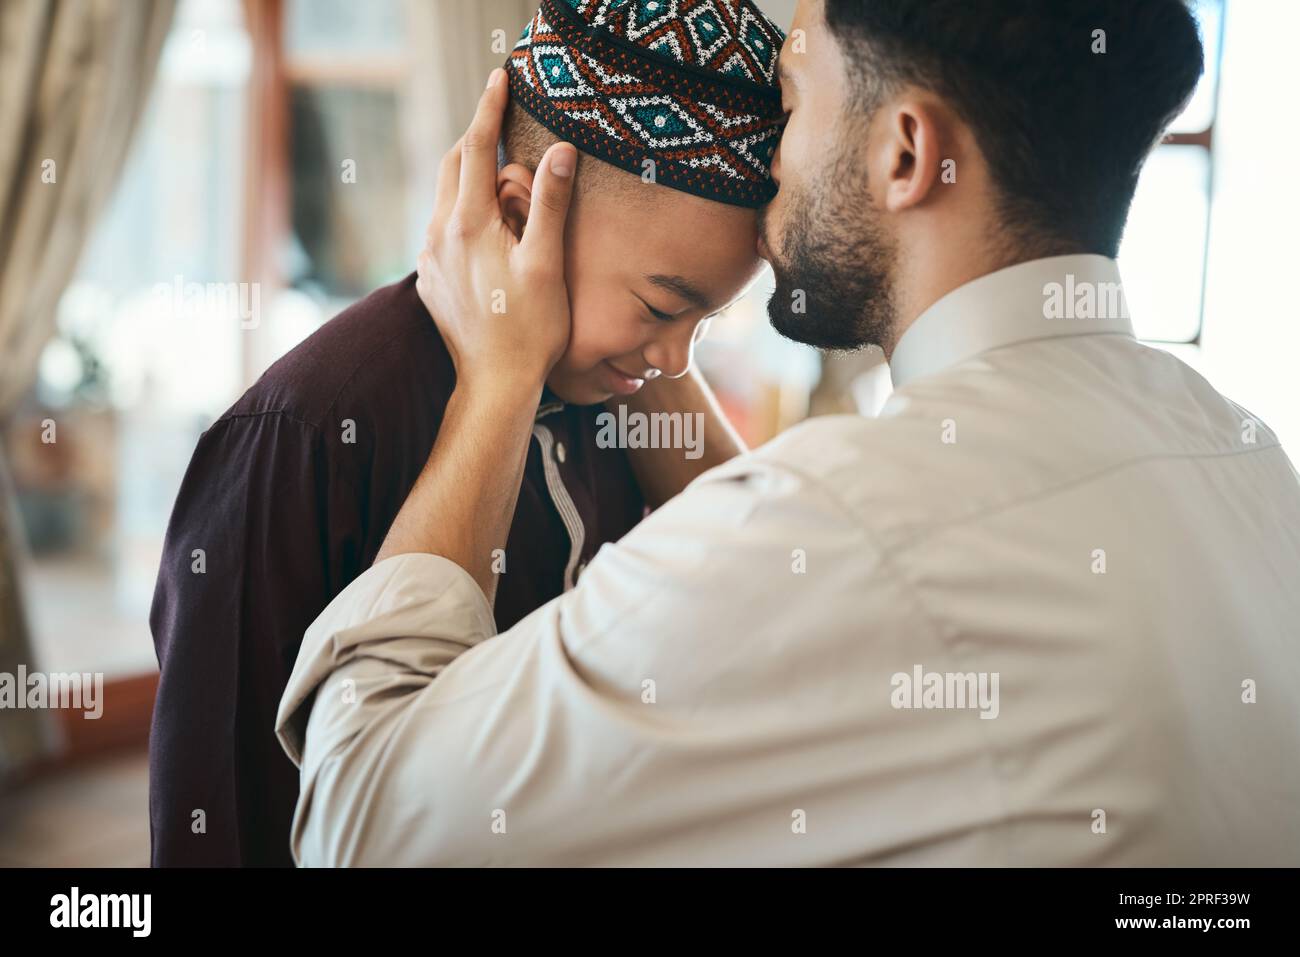 Muslim father, parent or man kissing his son on the forehead, bonding and showing affection at home. Happy, smiling and Arab boy embracing, celebrating traditional holiday and being peaceful with dad Stock Photo